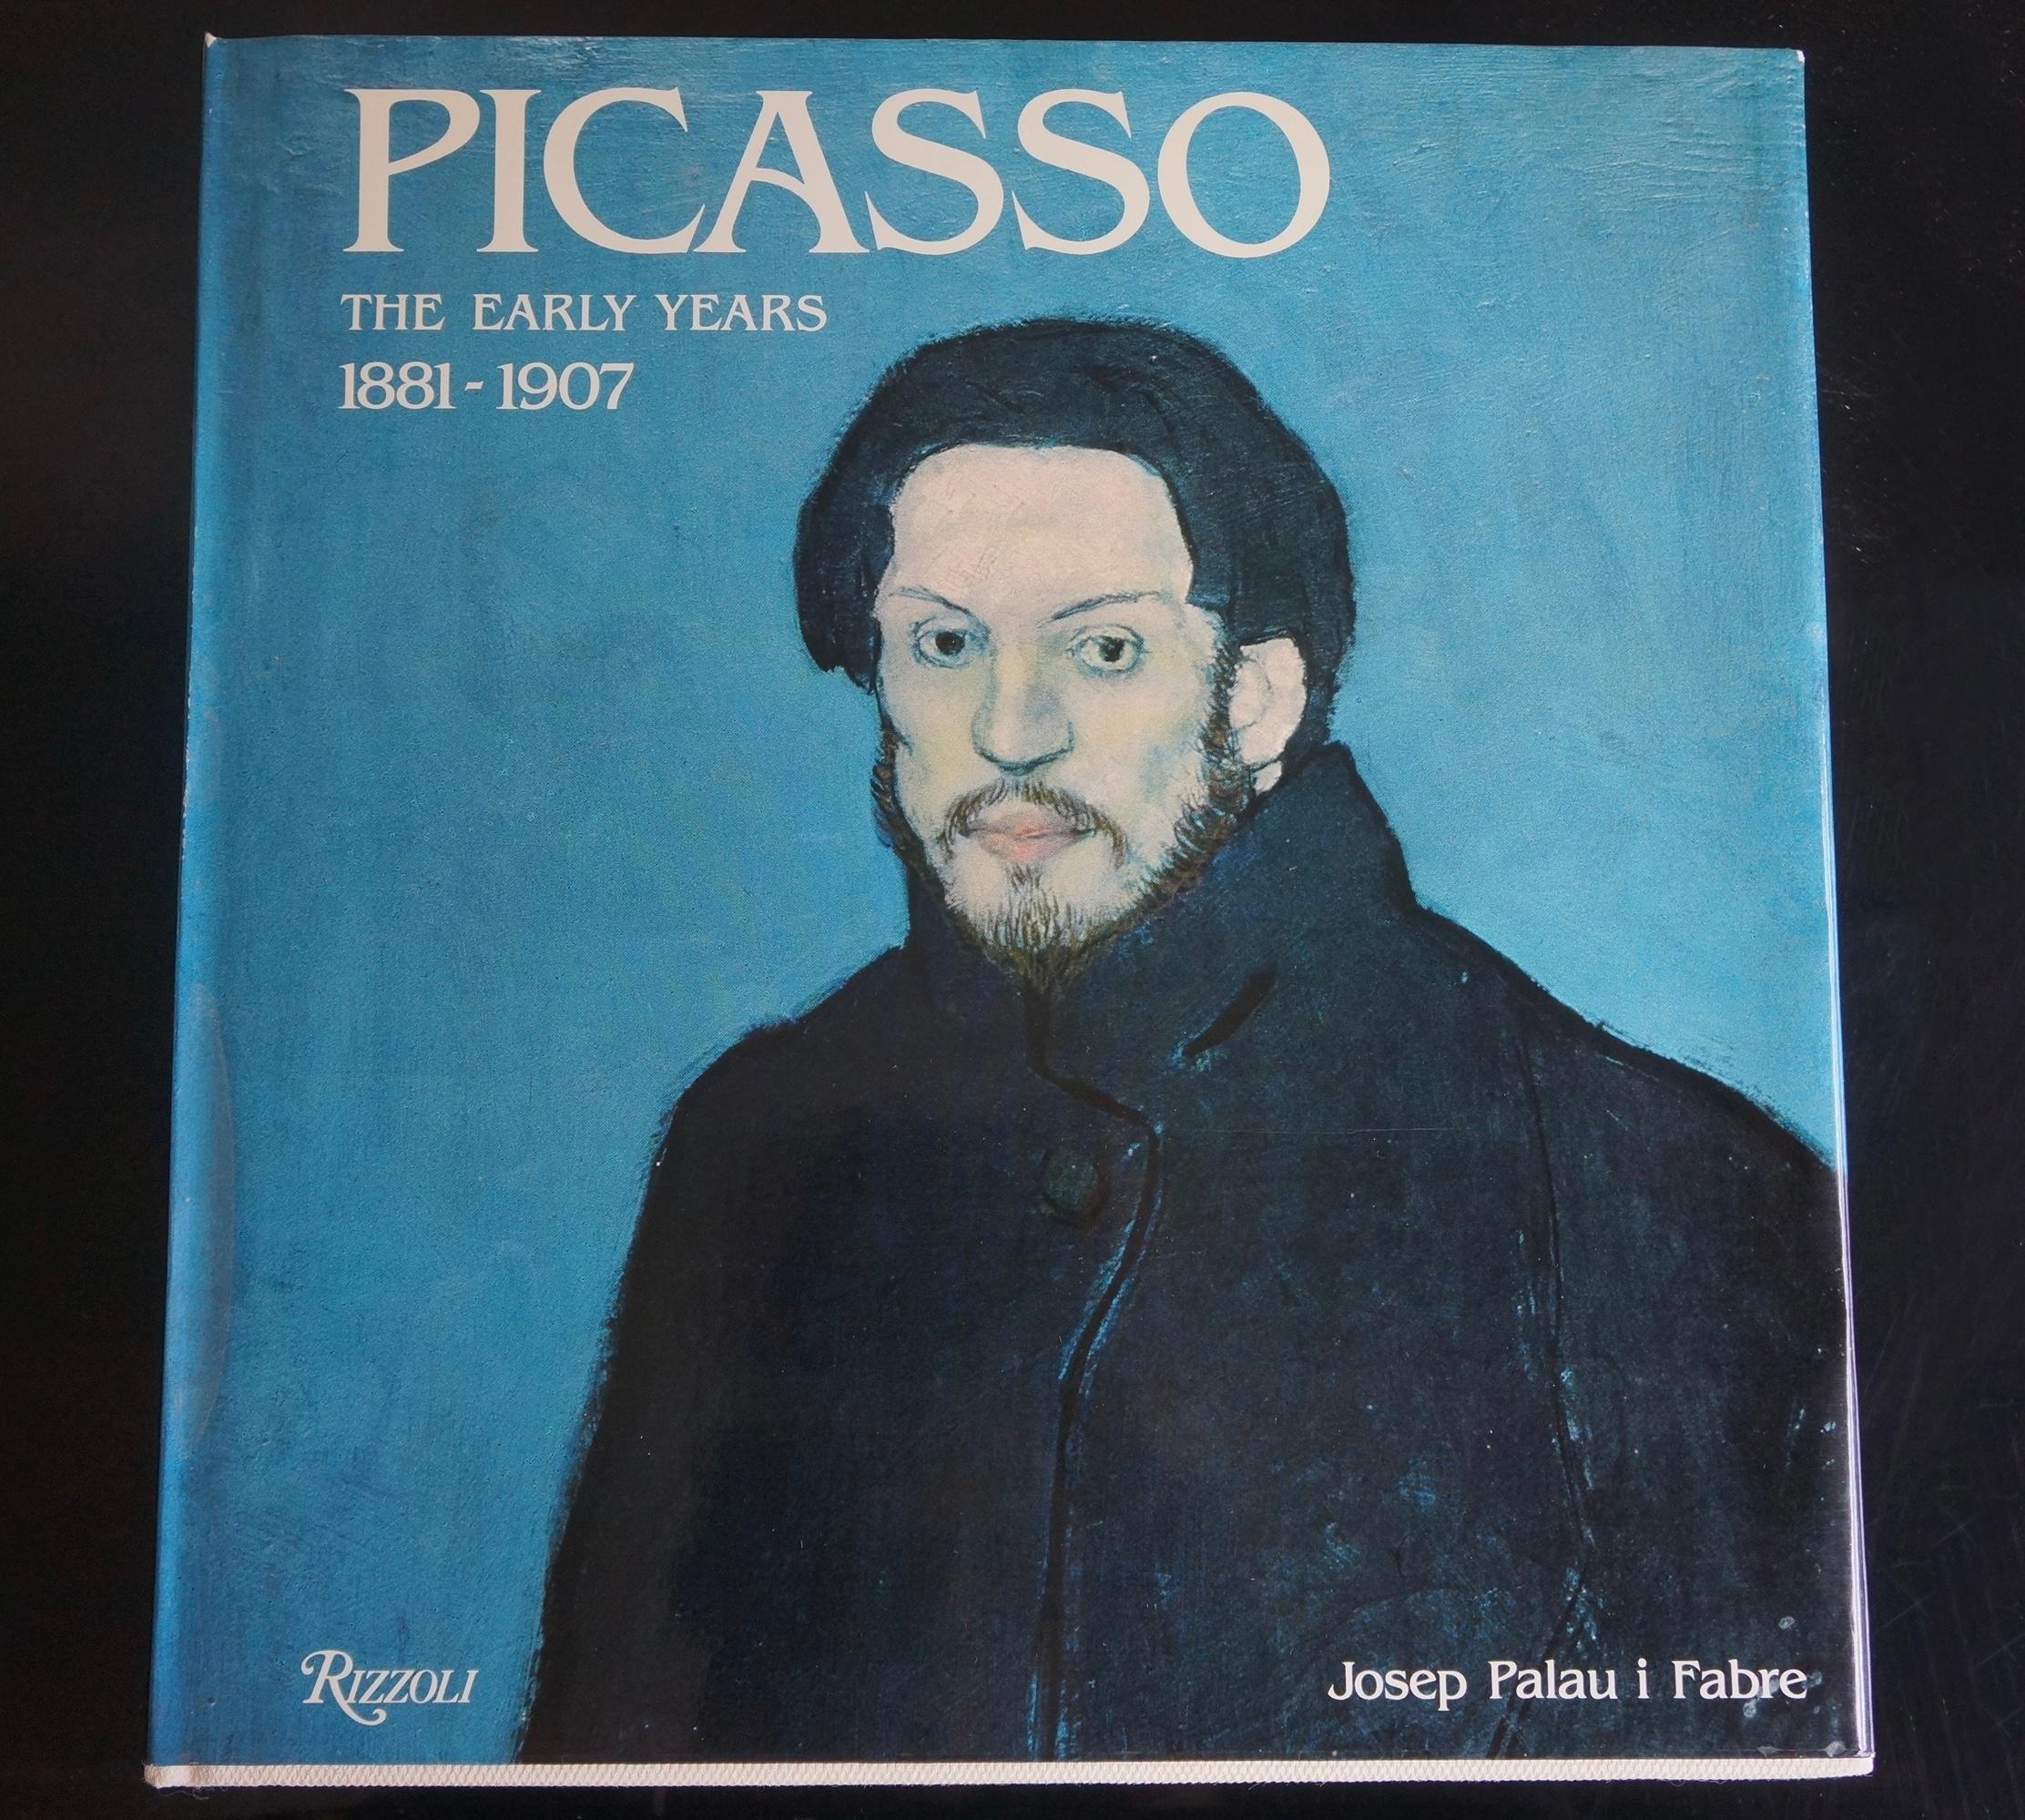 20th Century ‘Picasso The Early Years 1881-1907’ Hardcover Art Book by Palau i Fabre  For Sale